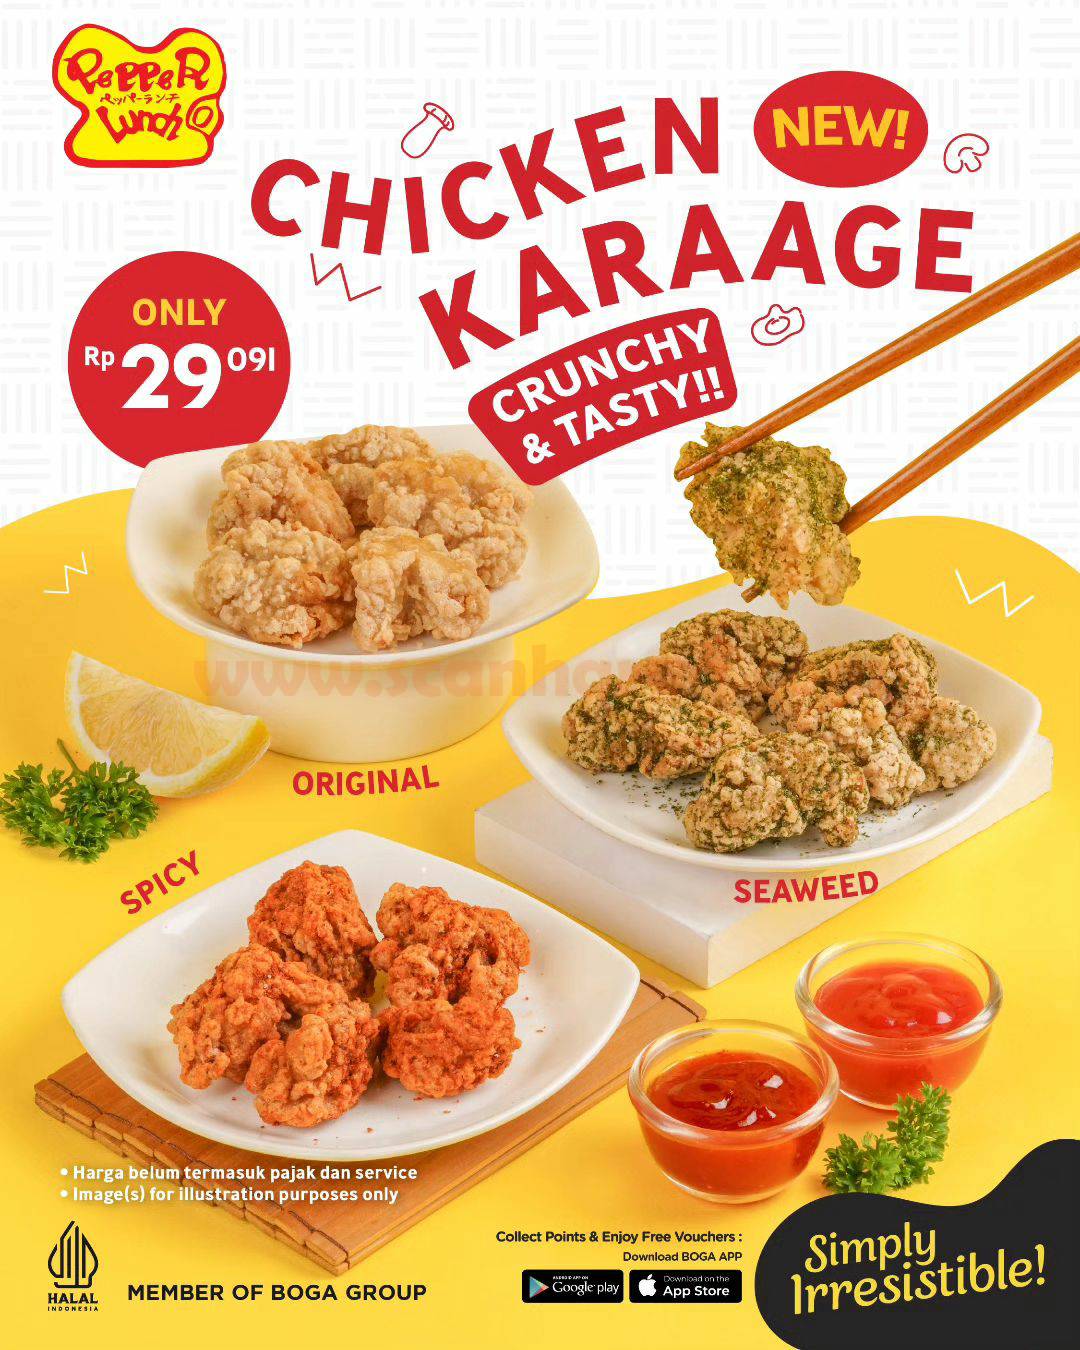 PEPPER LUNCH Promo CHICKEN KARAAGE For Only Rp. 29.091